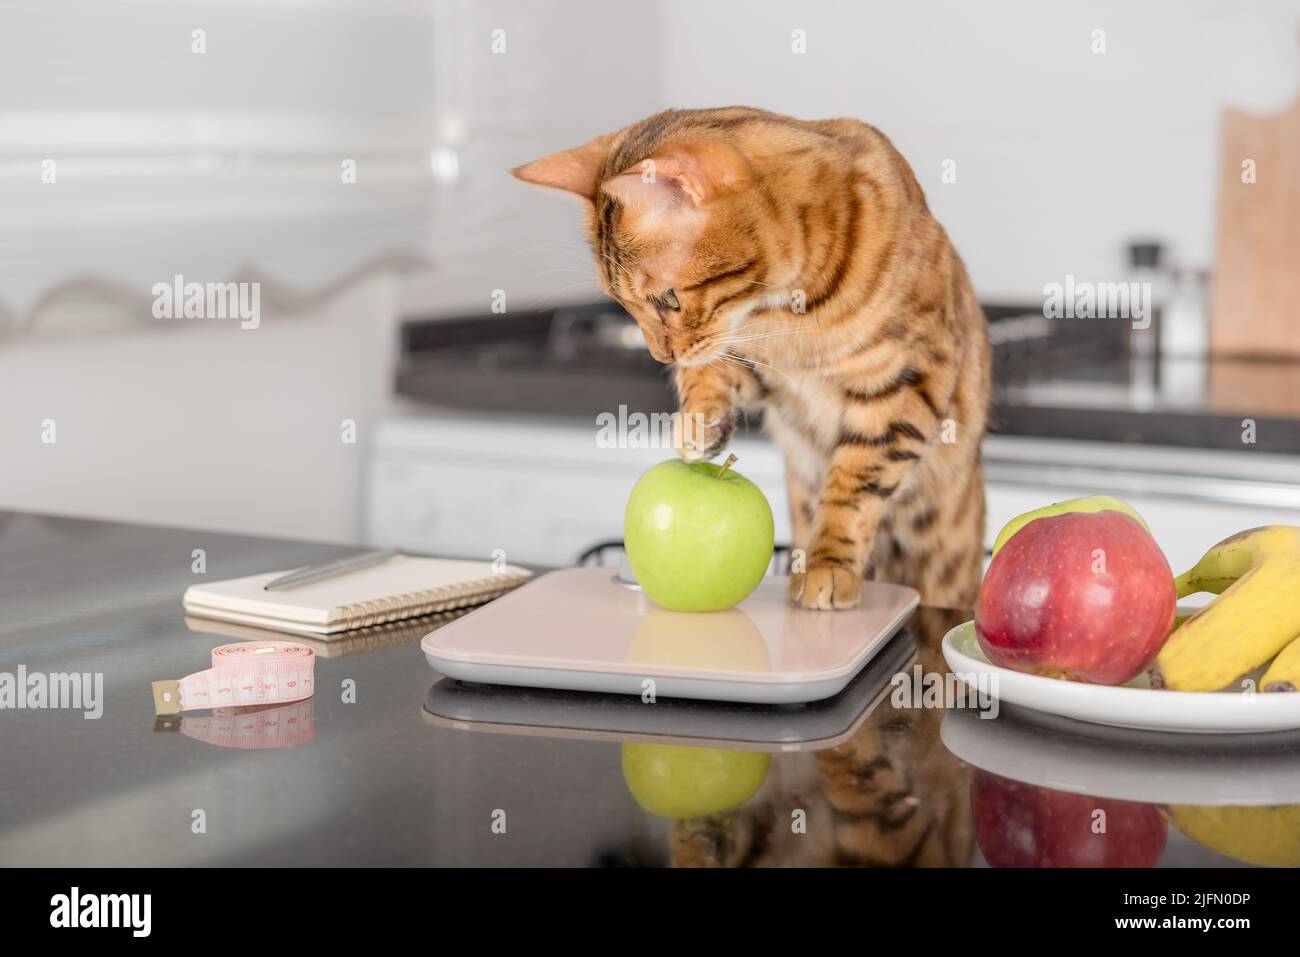 https://c8.alamy.com/comp/2JFN0DP/bengal-cat-weighs-an-apple-on-a-kitchen-scale-calorie-counting-for-weight-control-2JFN0DP.jpg